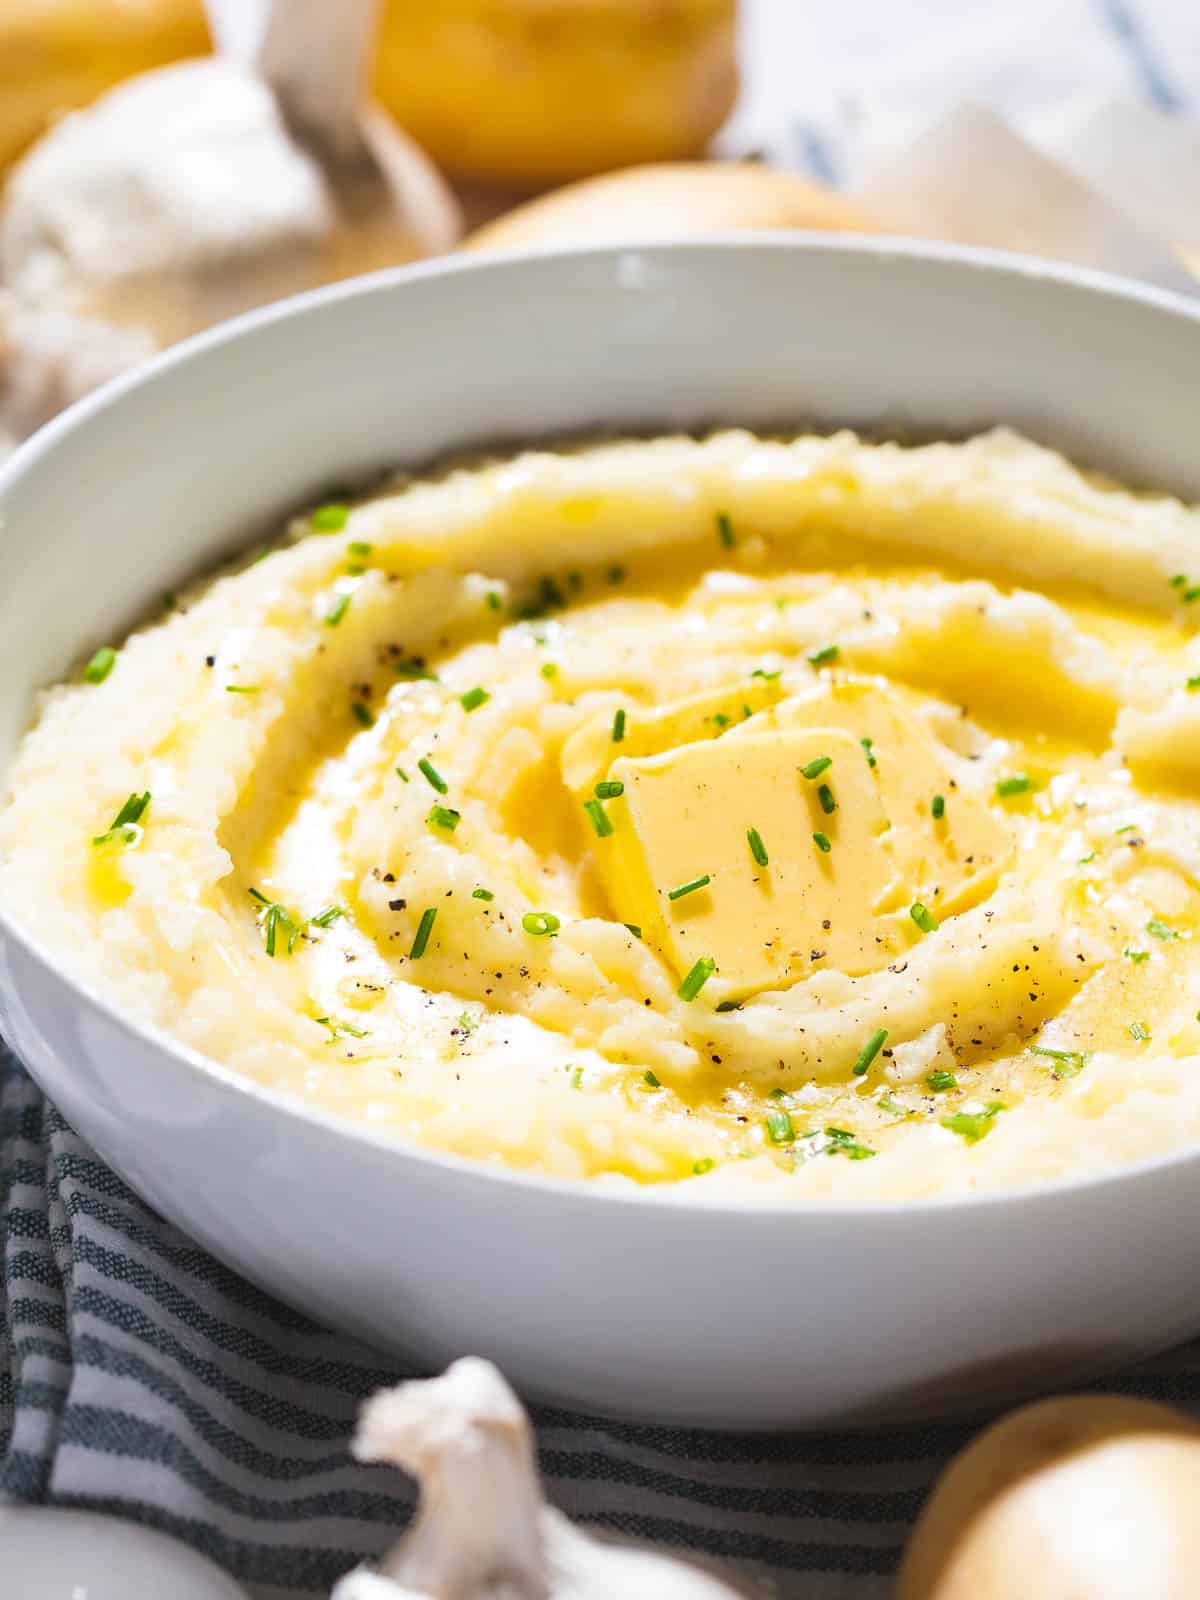 Garlic mashed potatoes with garlic butter and chives in a white bowl.